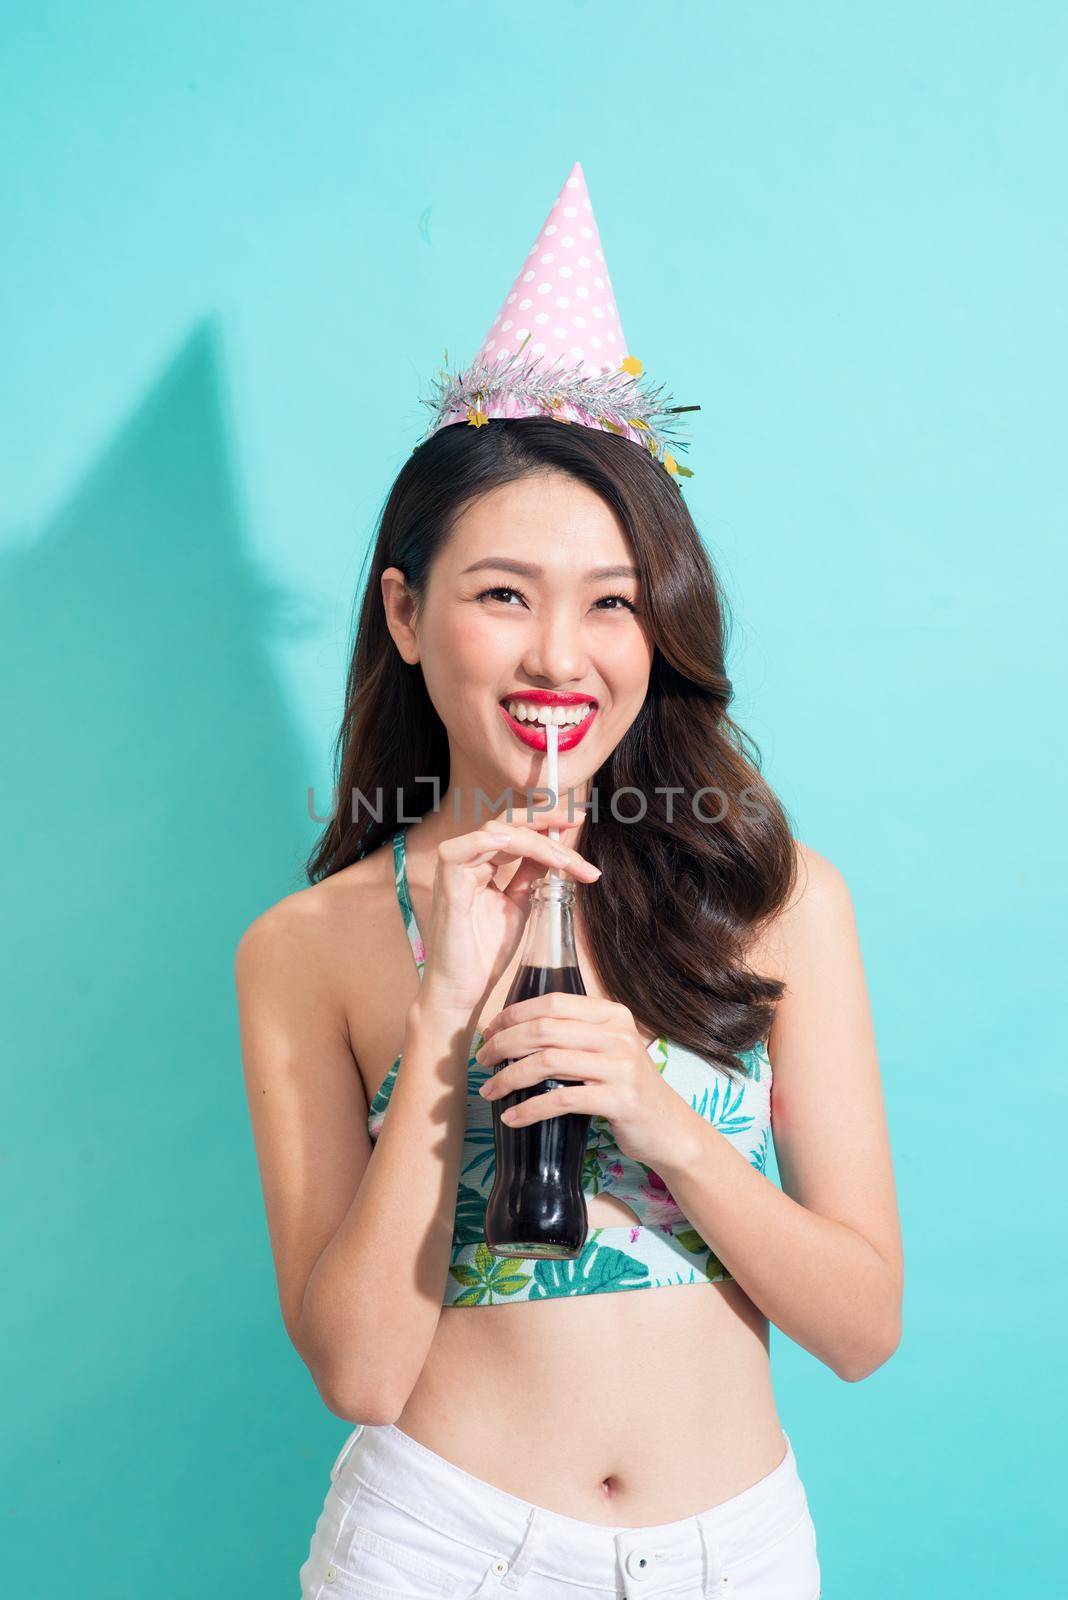 Fashion pretty woman drinks coke from bottle over colorful blue background by makidotvn